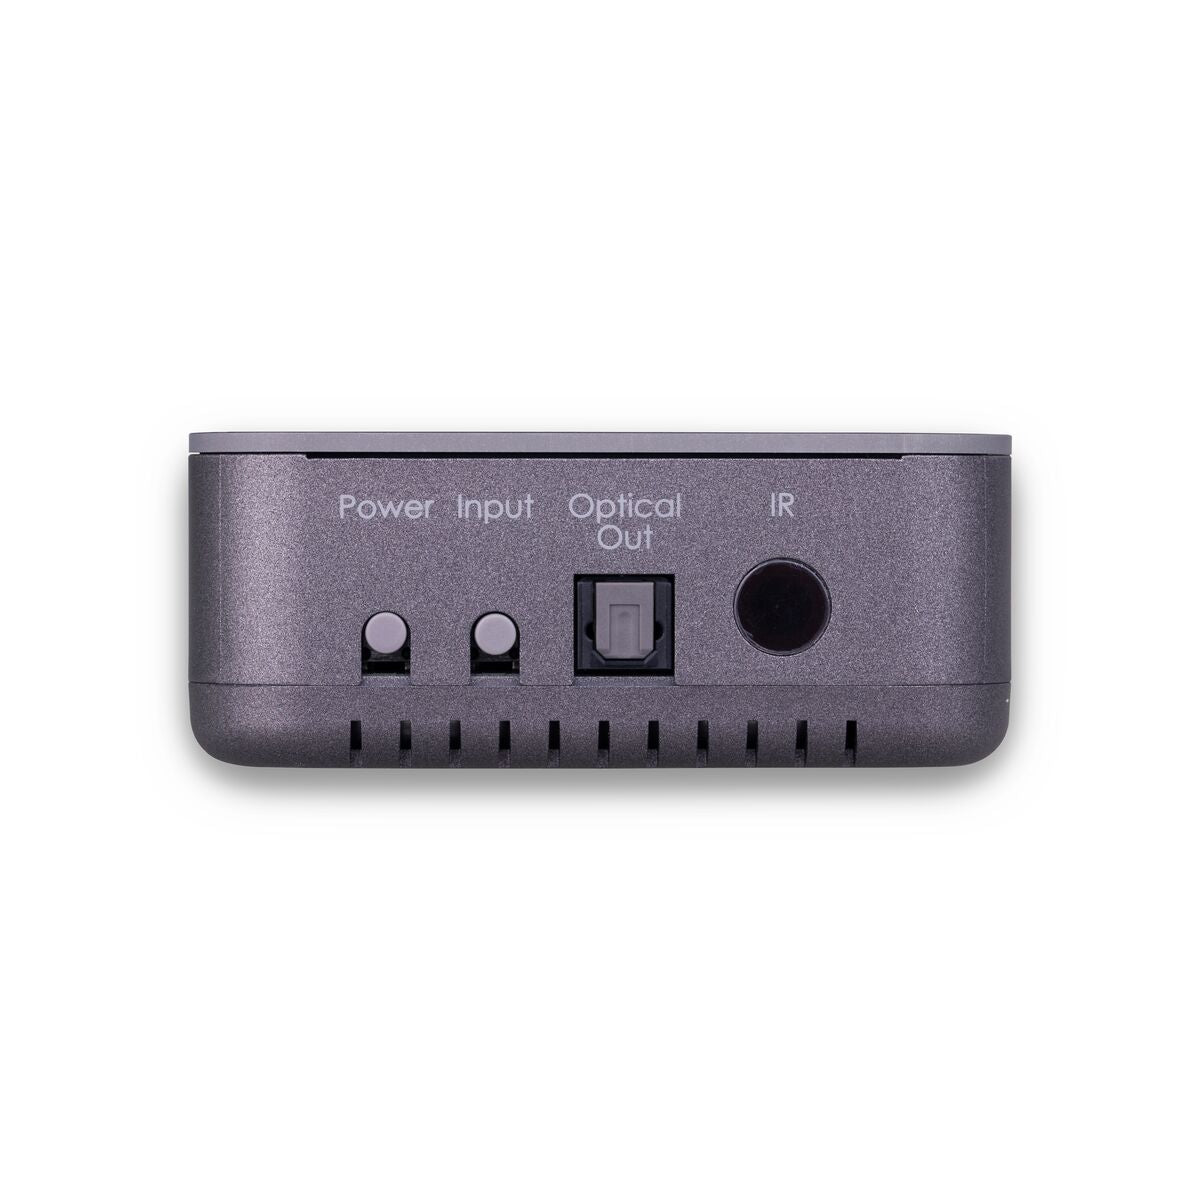 Connect TS41 - Optical Toslink switch 4 in / 1 out - Side View Connections Audio OUT, Power input and IR | Marmitek